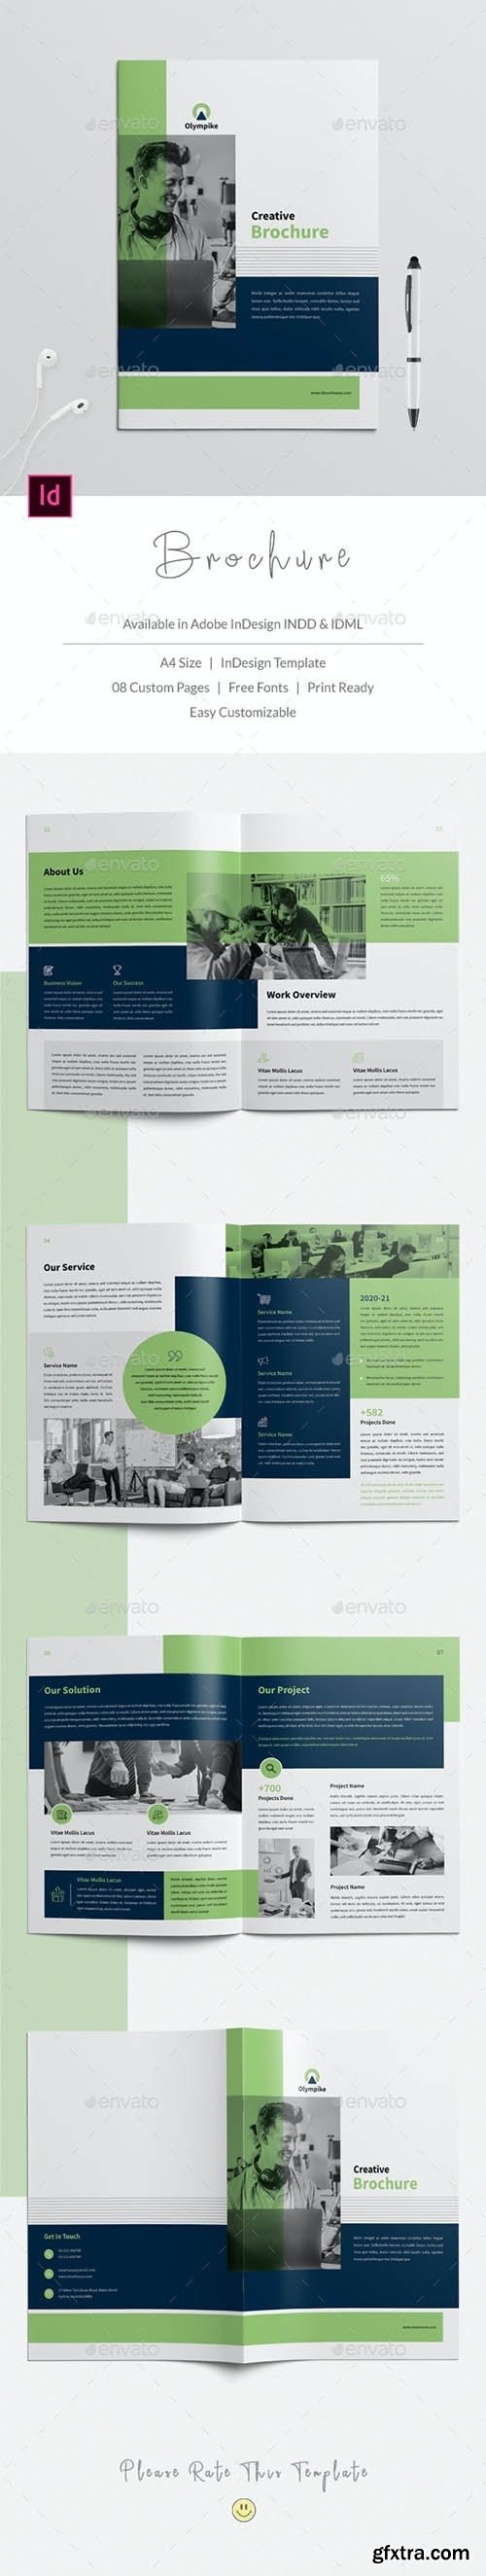 GraphicRiver - 8 Pages Brochure 27537944